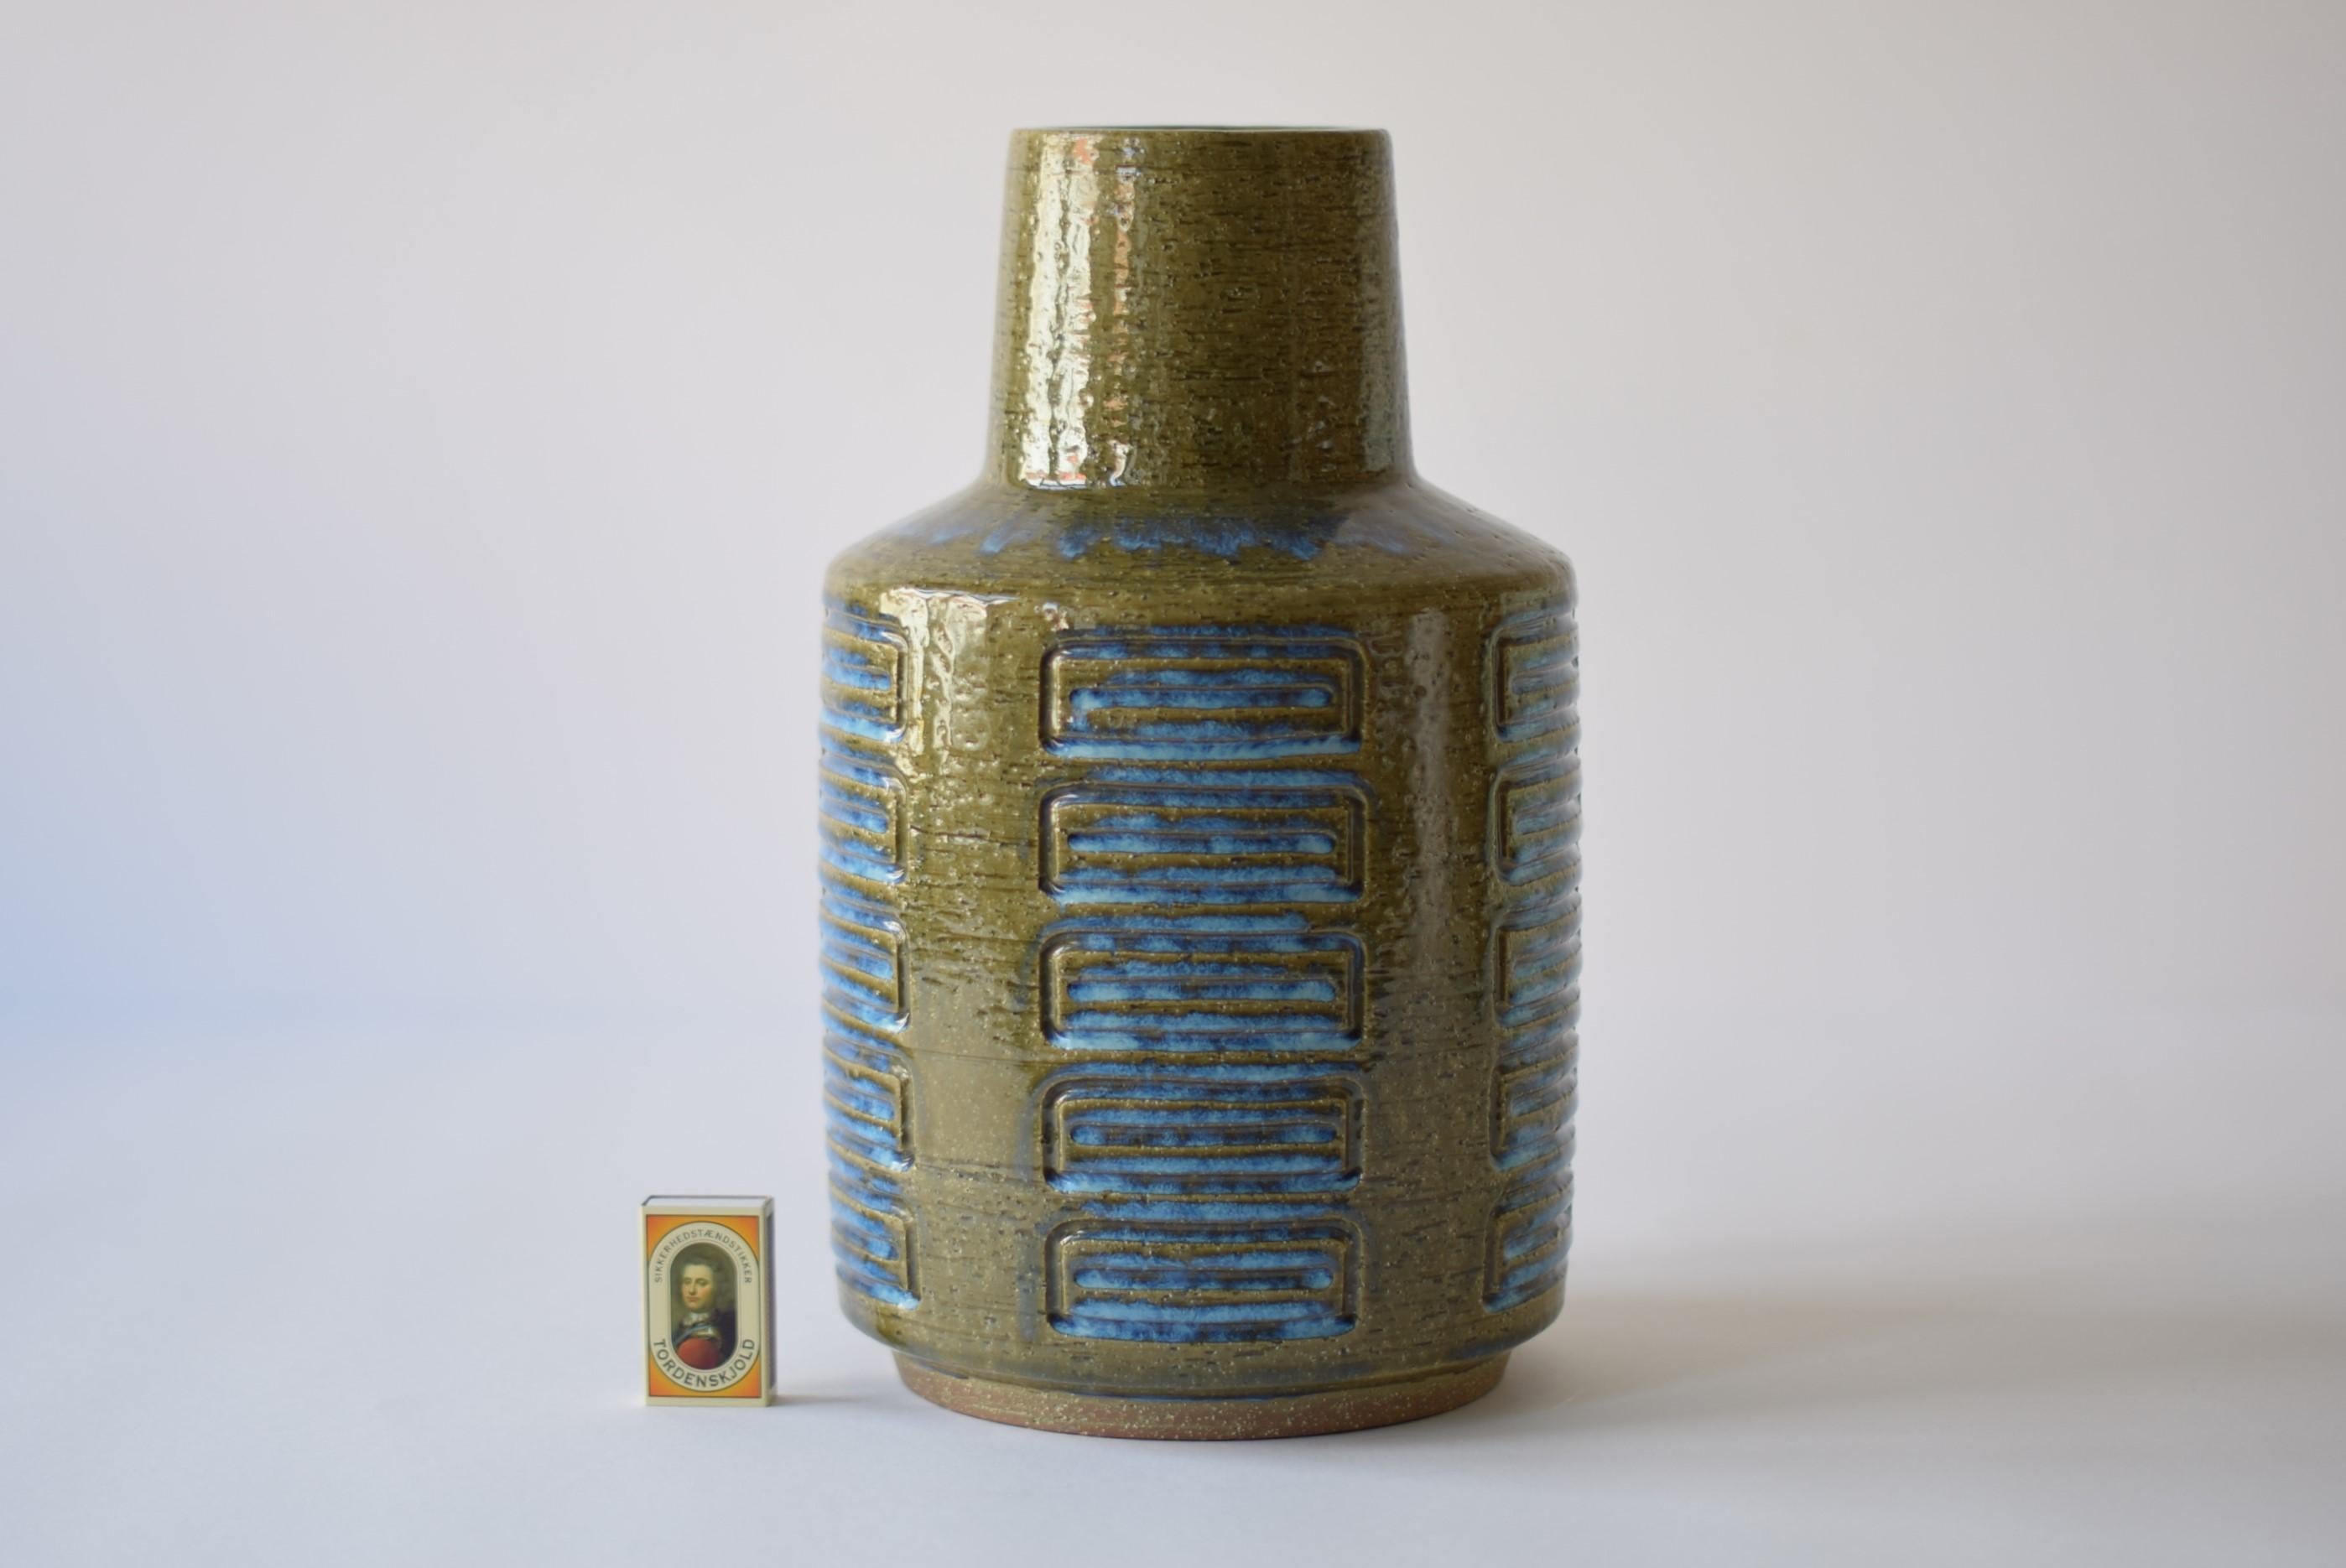 This huge budded vase was designed by Per Linnemann-Schmidt for Palshus and was produced in Denmark during the 1960s or early 1970s. It has a shiny glaze in moss green with blue in the incised stripes and on the shoulder. The vase is made with the